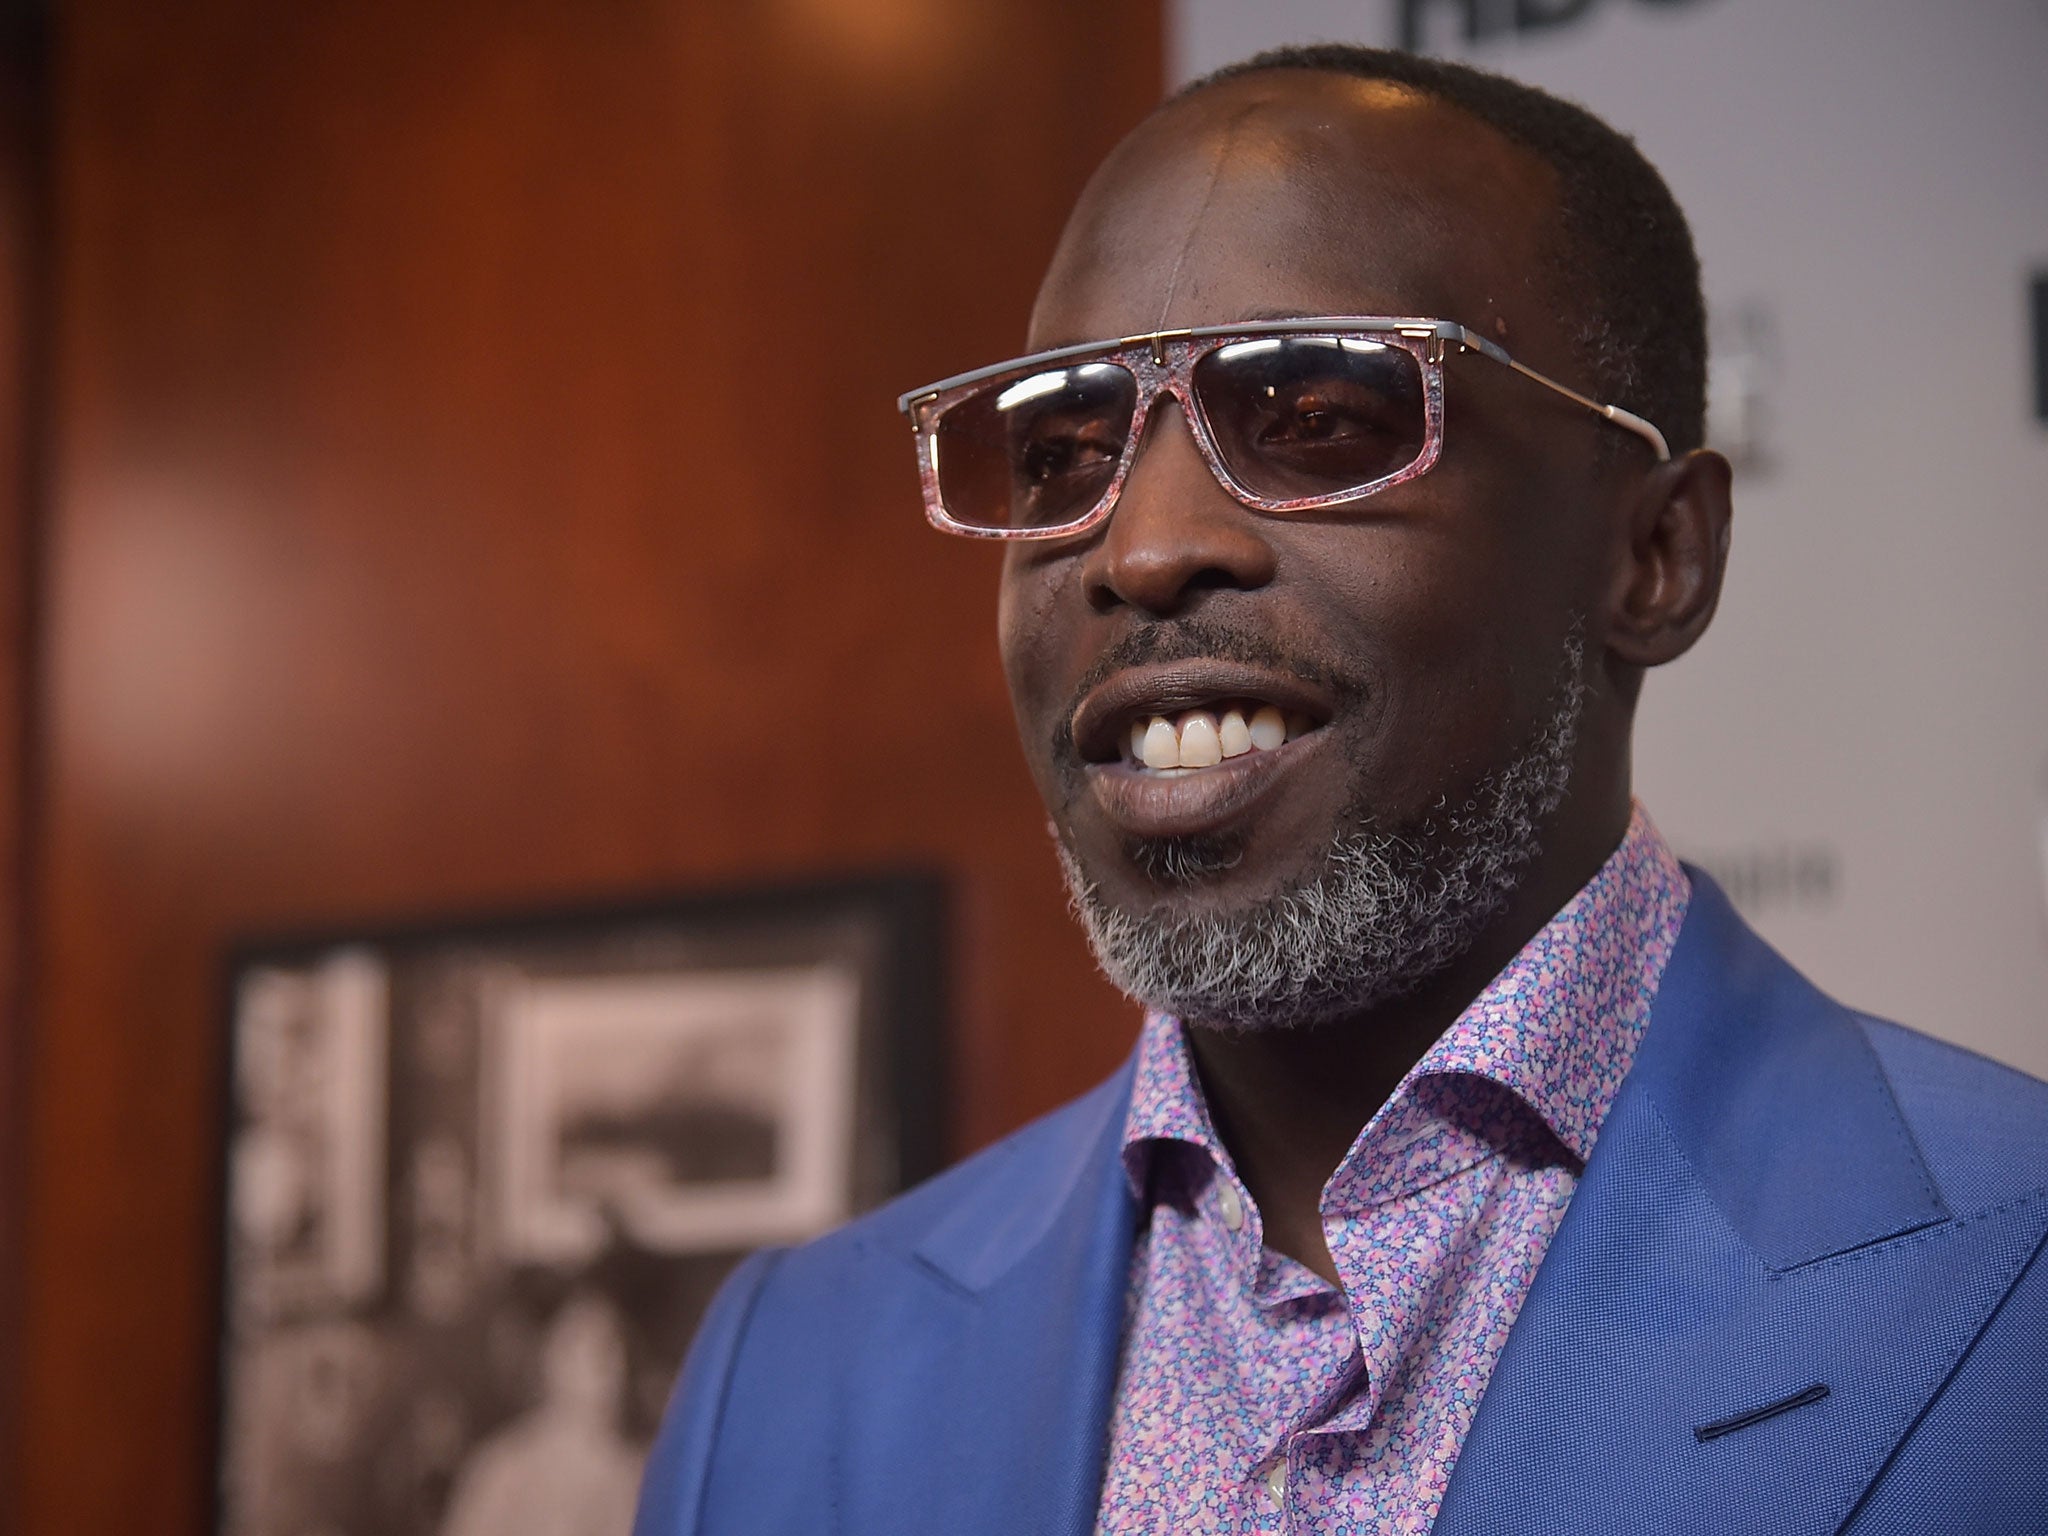 Michael K Williams has been cast as a character called Hawkins in Paul Feig's Ghostbusters